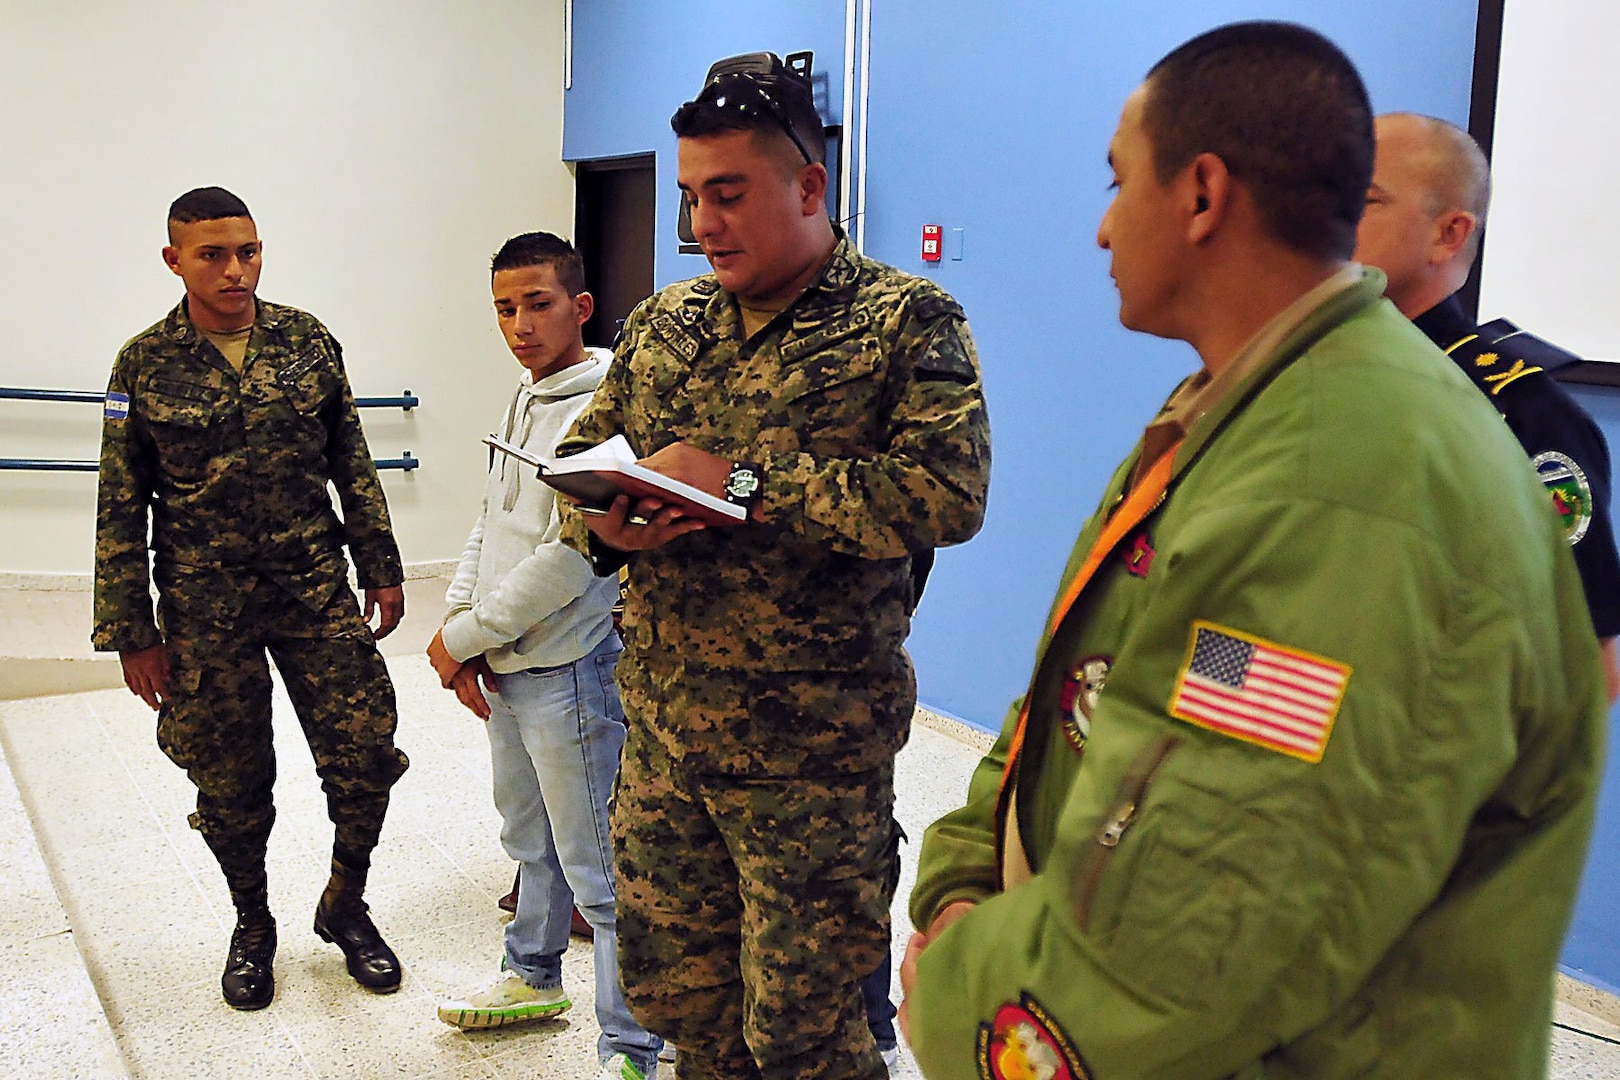 Members of the Honduran emergency response team participate in a brainstorming session during the humanitarian assistance and emergency relief aid seminar conducted on Jan. 9, 2014, by the Puerto Rico National Guard at Tegucigalpa, Honduras.